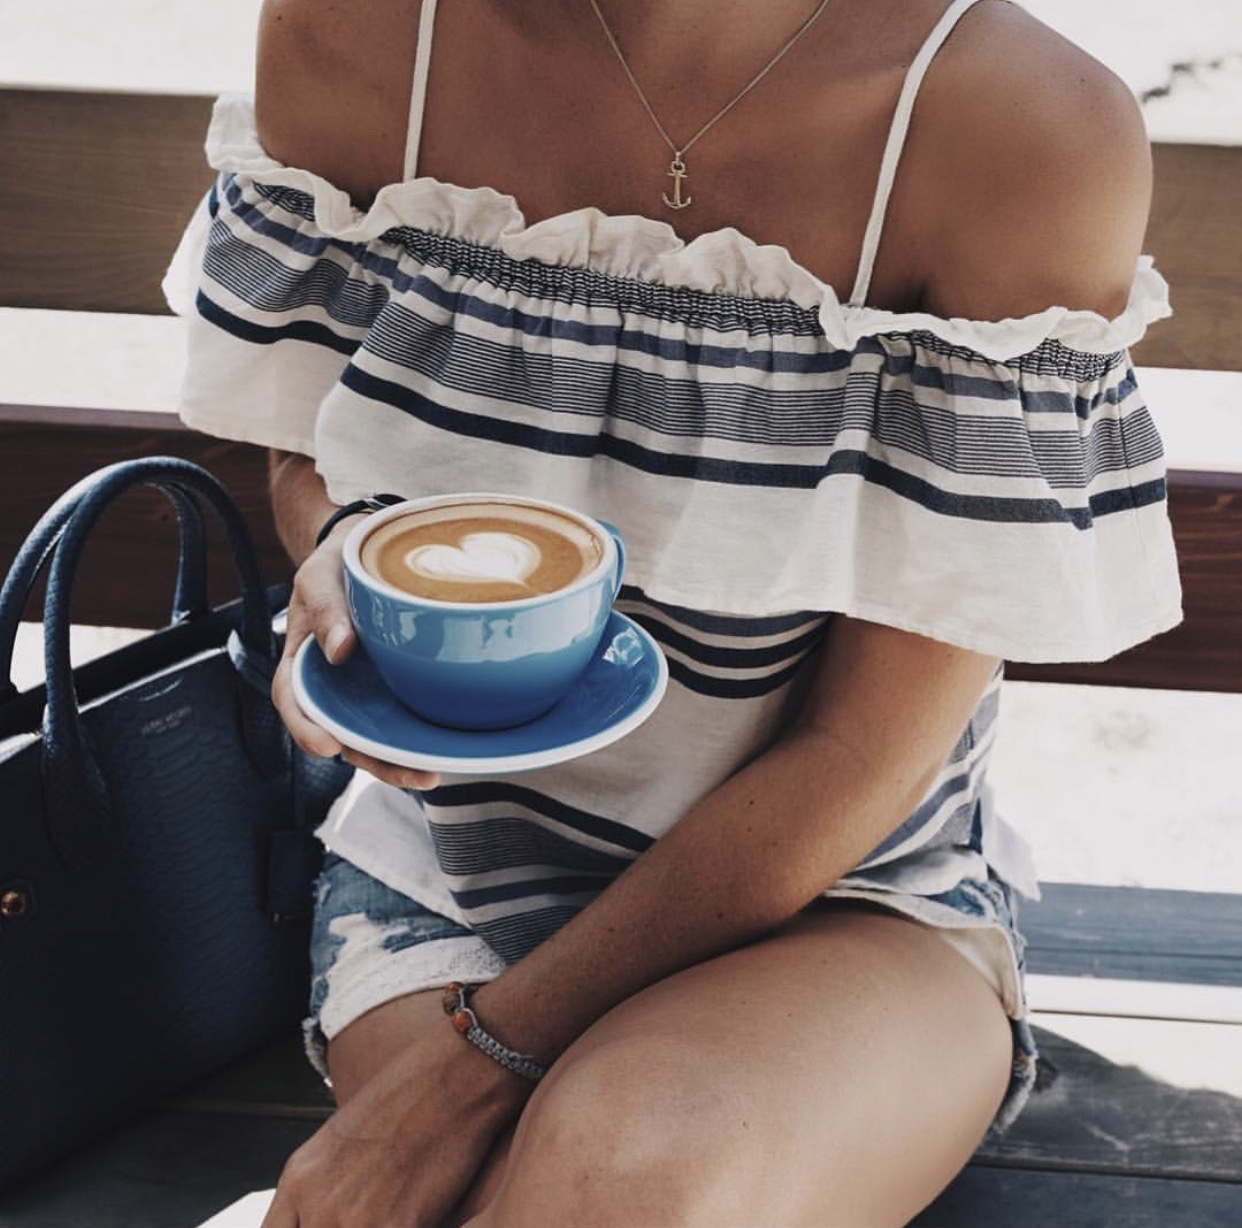 DTKAustin shares her latest Instagram fashion posts from June. Sales, great deals and fabulous looks await. Click for more information and photos.